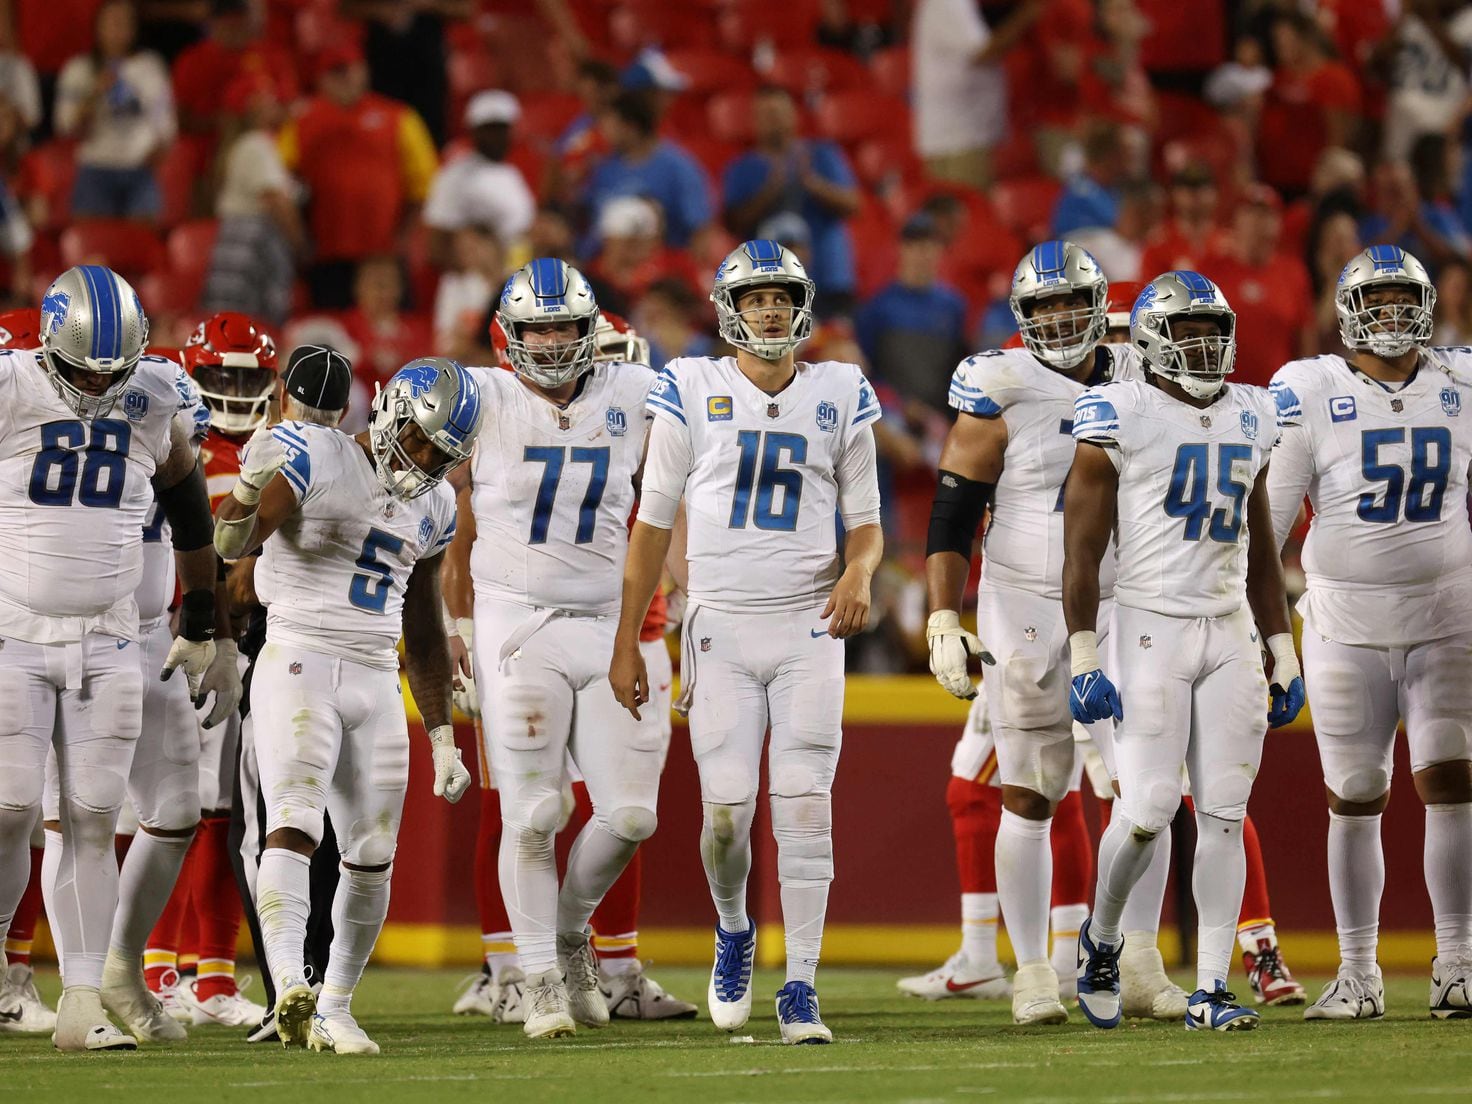 What did NBC's Mike Tirico say that angered Detroit Lions fans